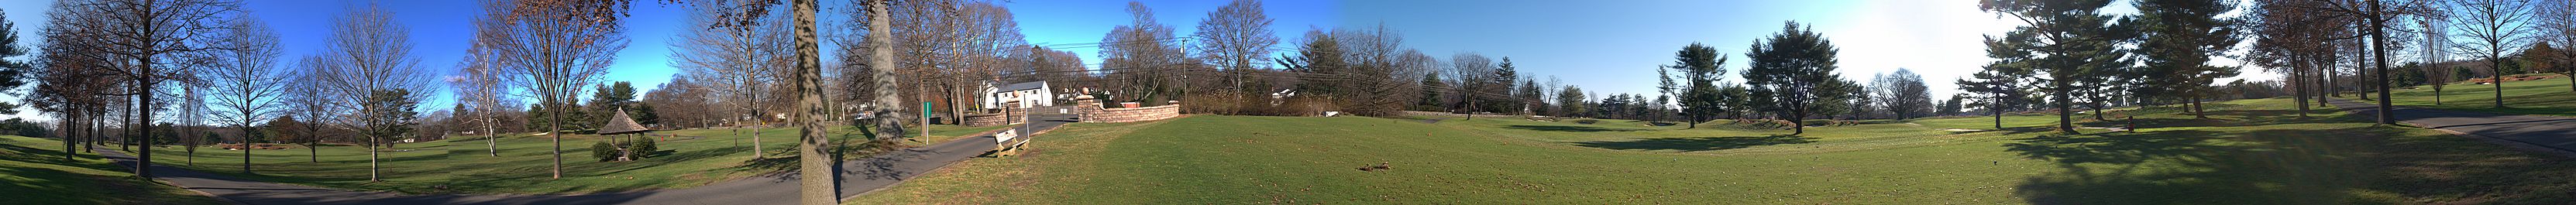 A panoramic view looking over Longshore Club Park, Westport, CT.